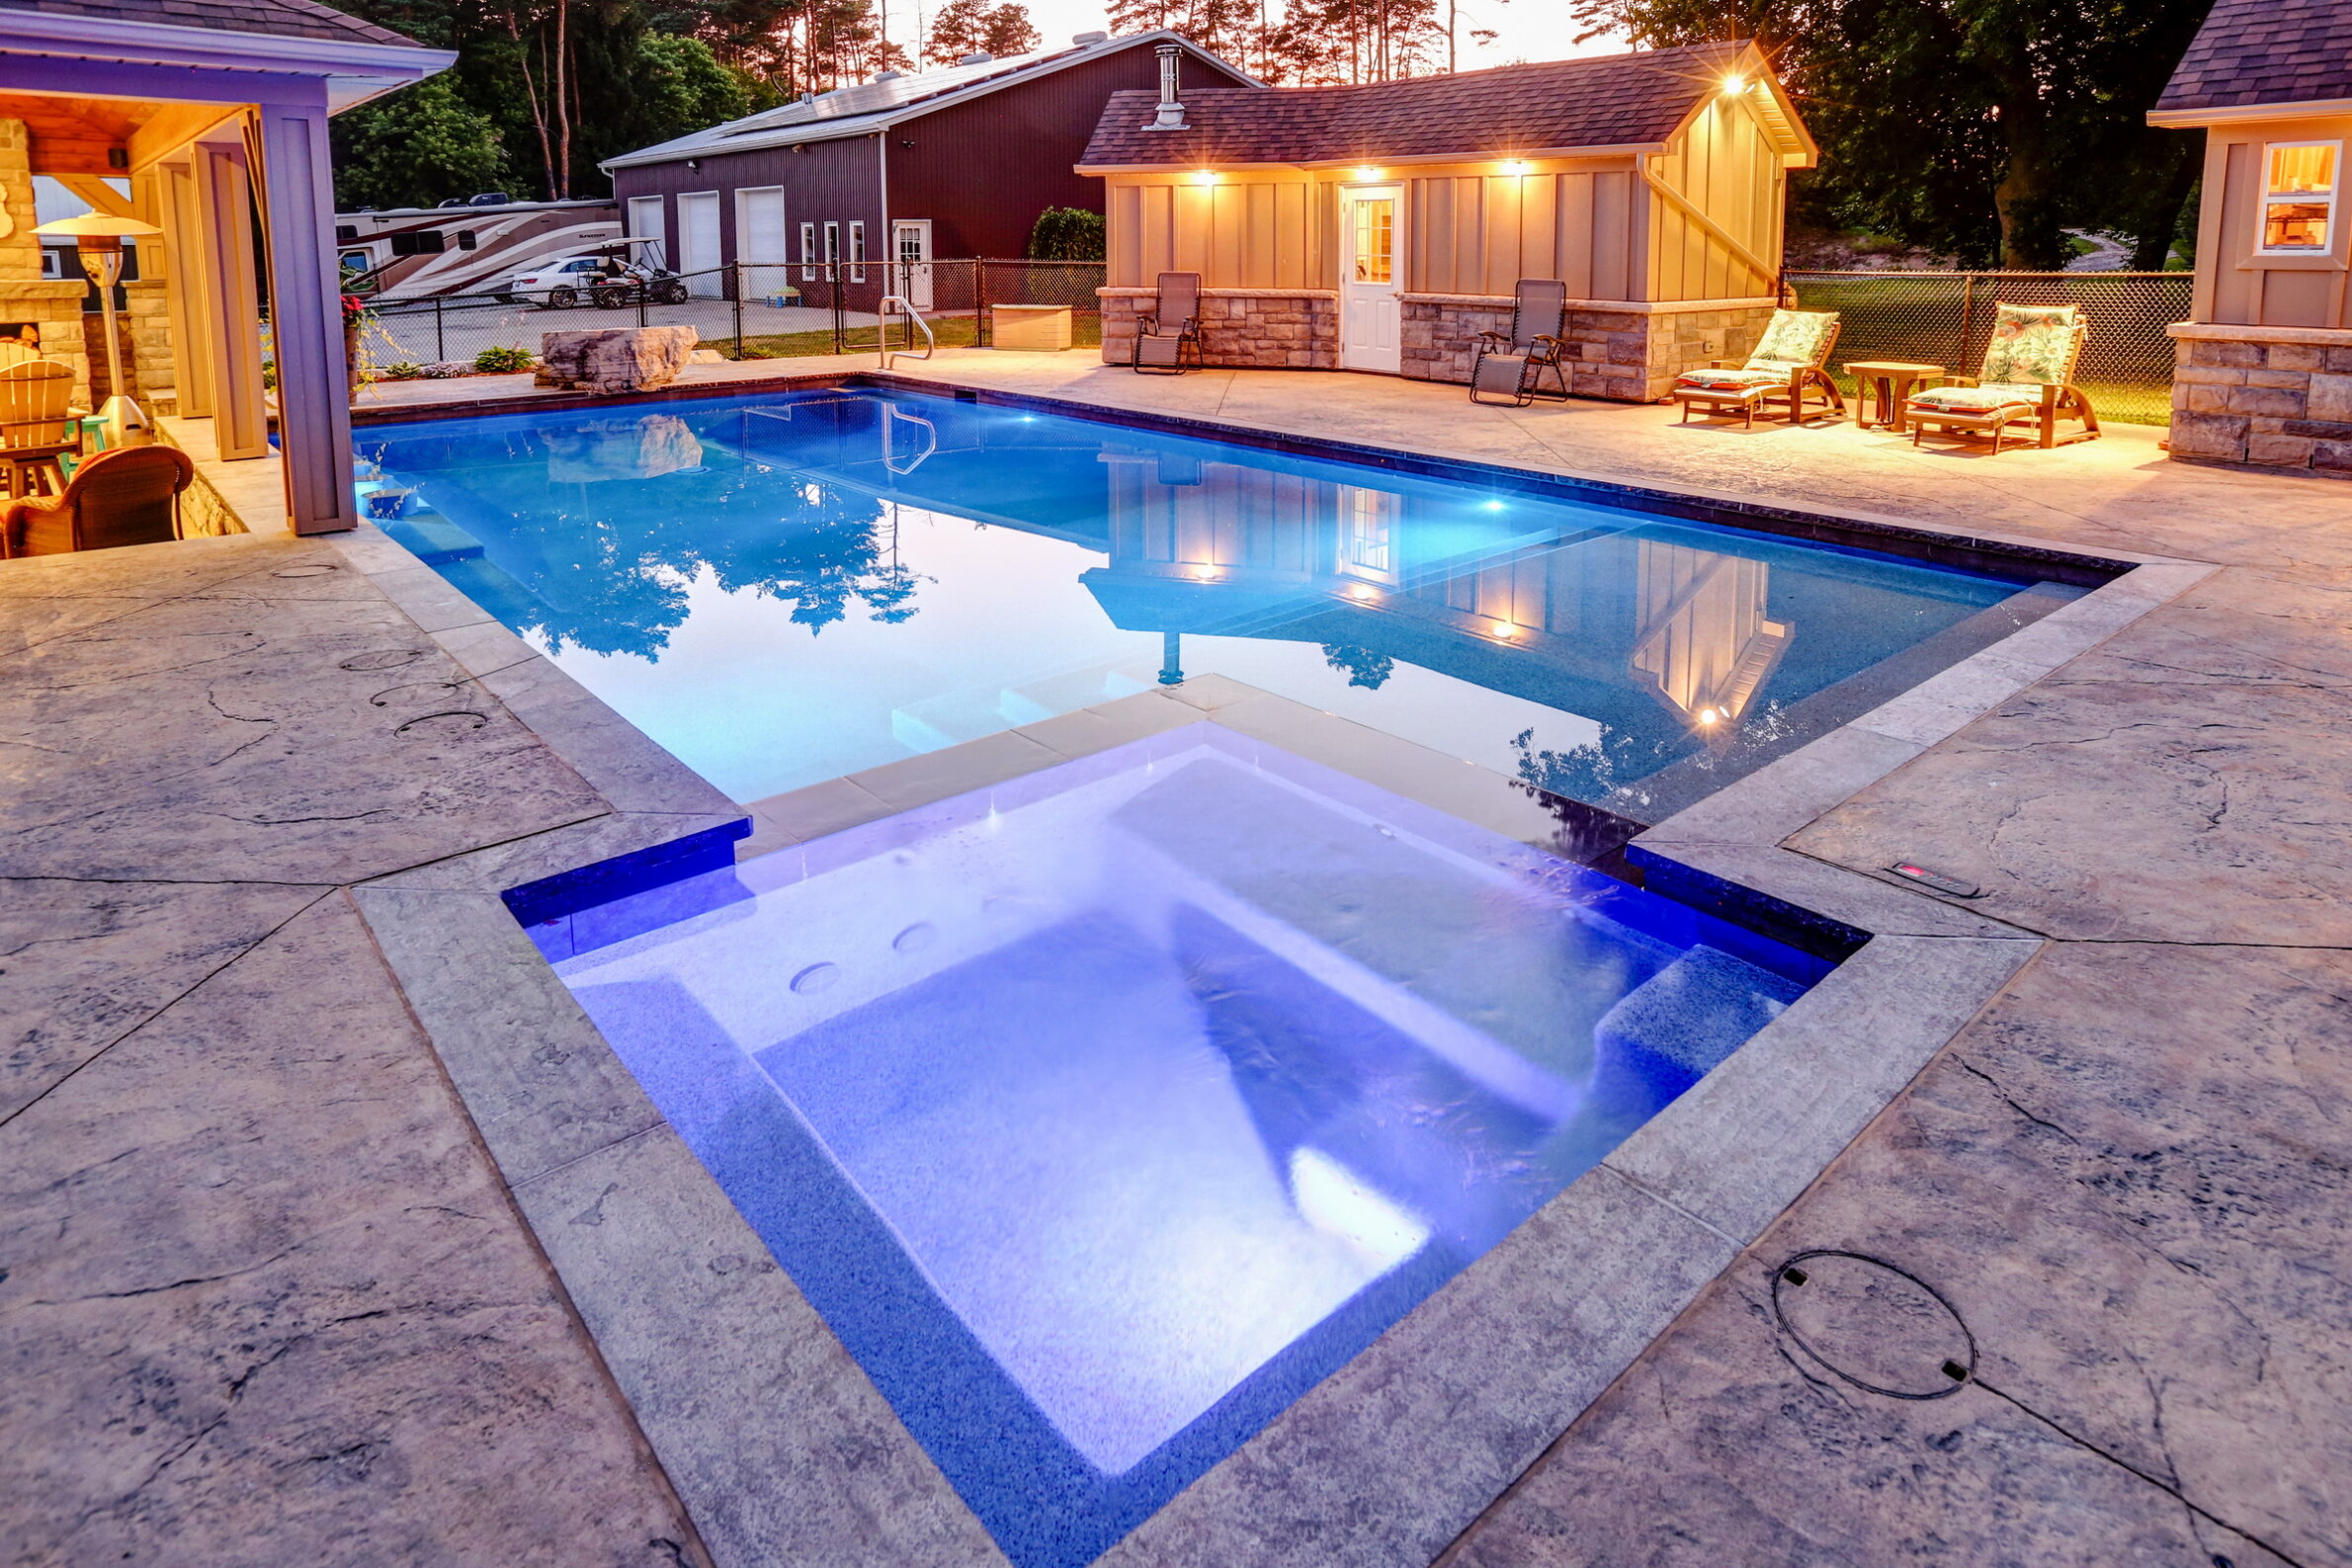 A luxurious residential swimming pool at dusk with clear blue waters, adjacent spa, patio furniture, and a house with warm lighting in the background.